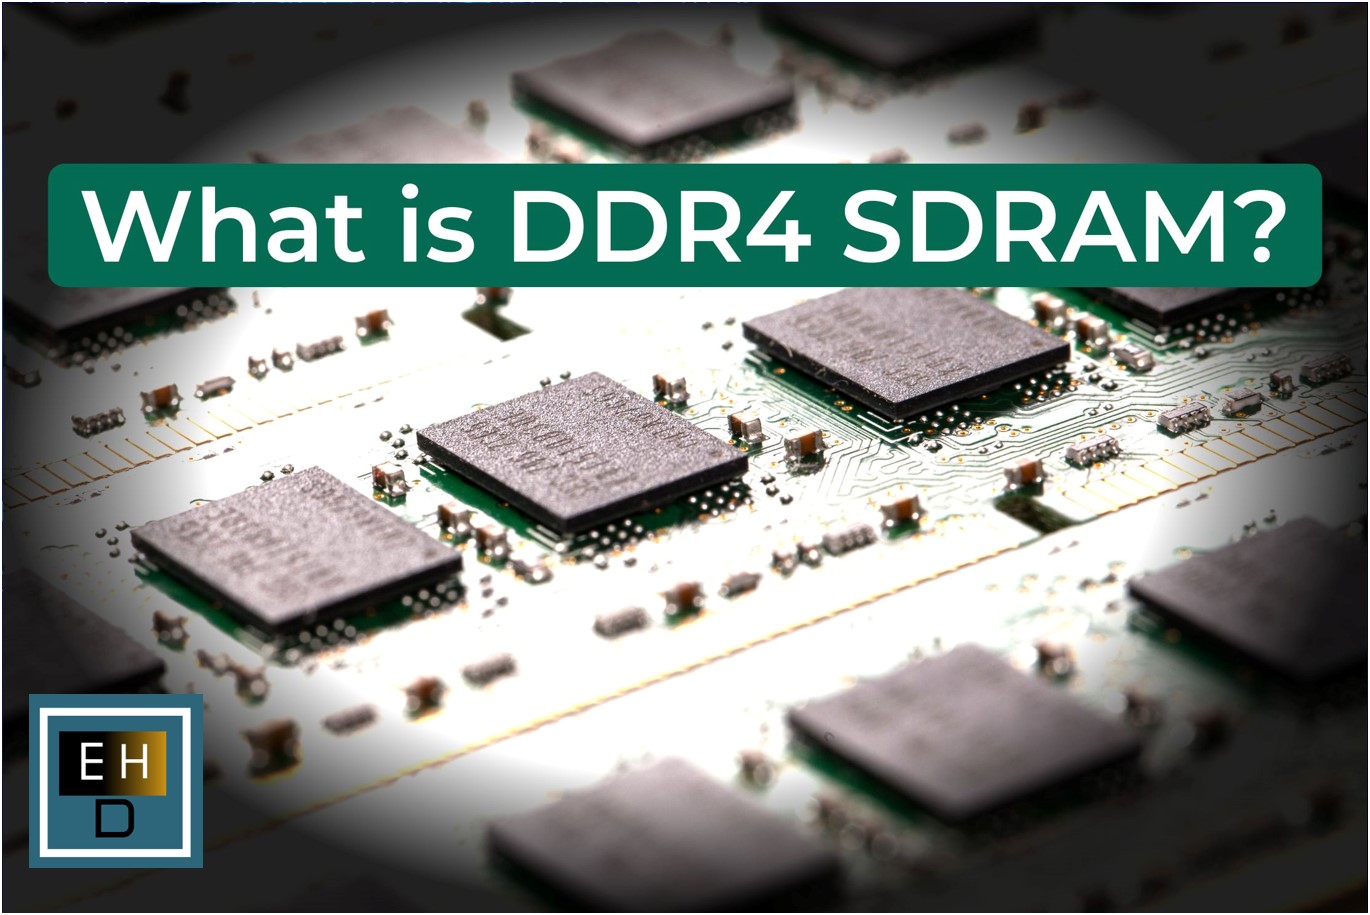 What is DDR4 SDRAM